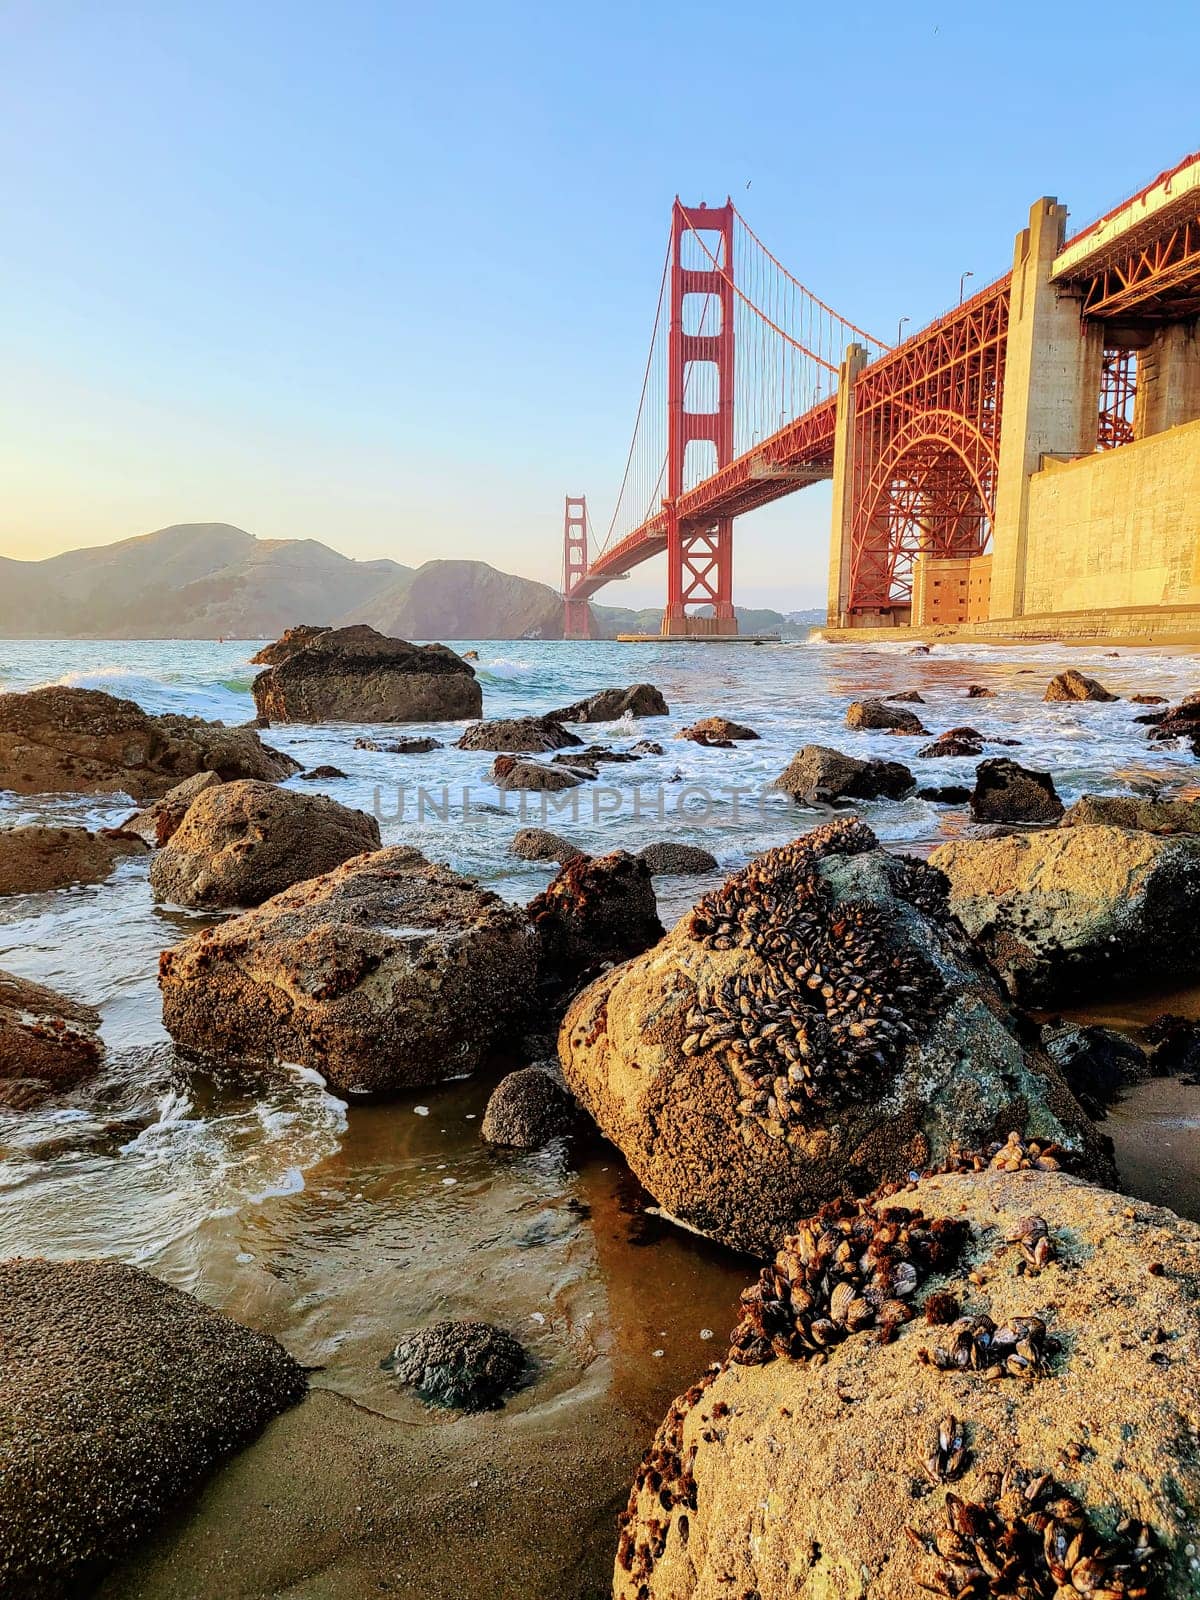 Golden Gate Bridge at Sunset, California 2022 - Iconic Structure Seen from Rocky Shoreline with Mussels